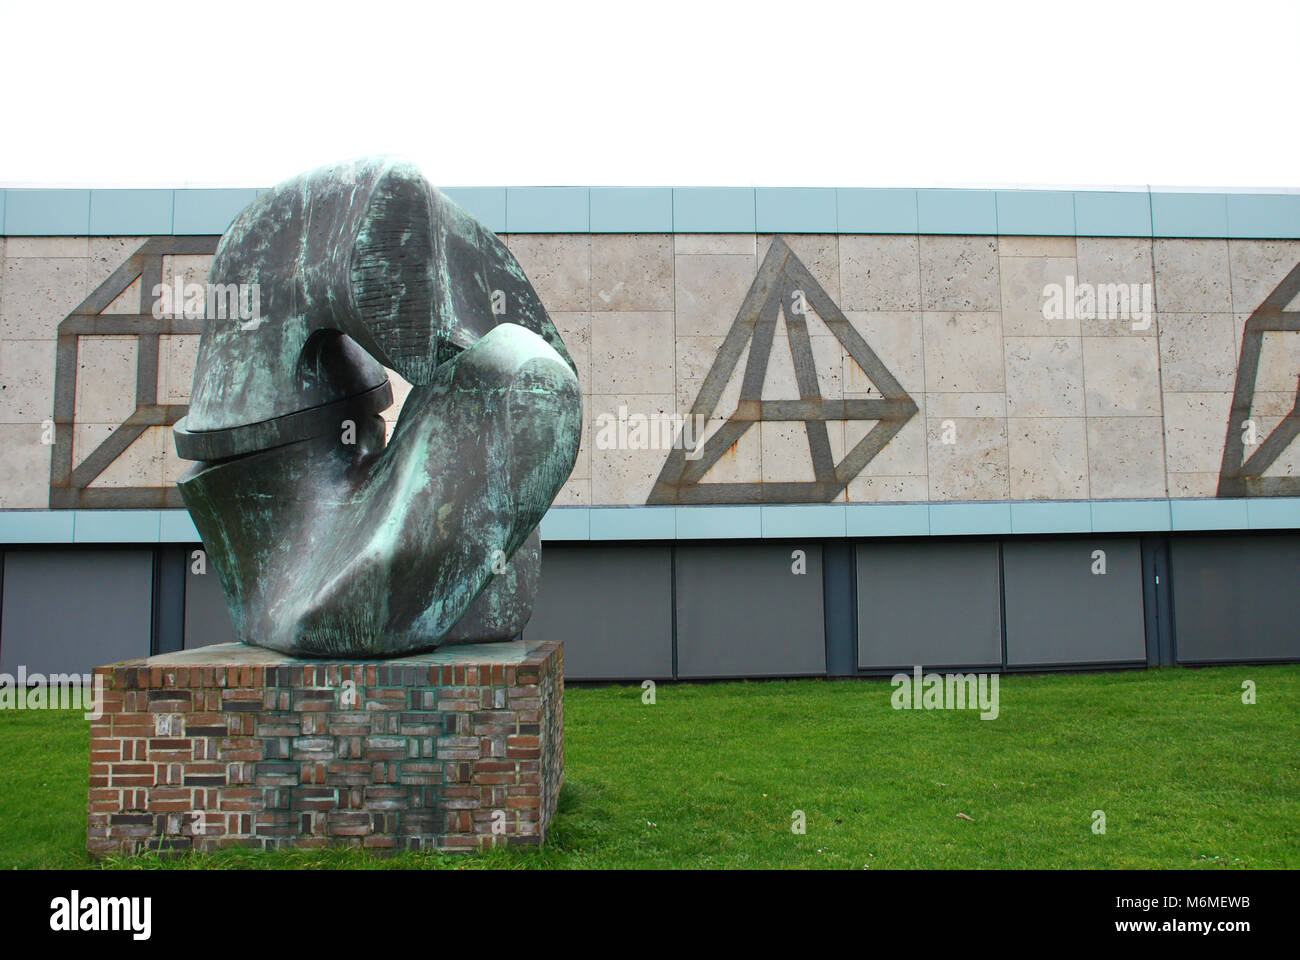 Large Locking Piece by Henry Moore and Relief with Geometric Figures by Sol LeWitt in the background, Gemeentemuseum, the Hague, the Netherlands Stock Photo